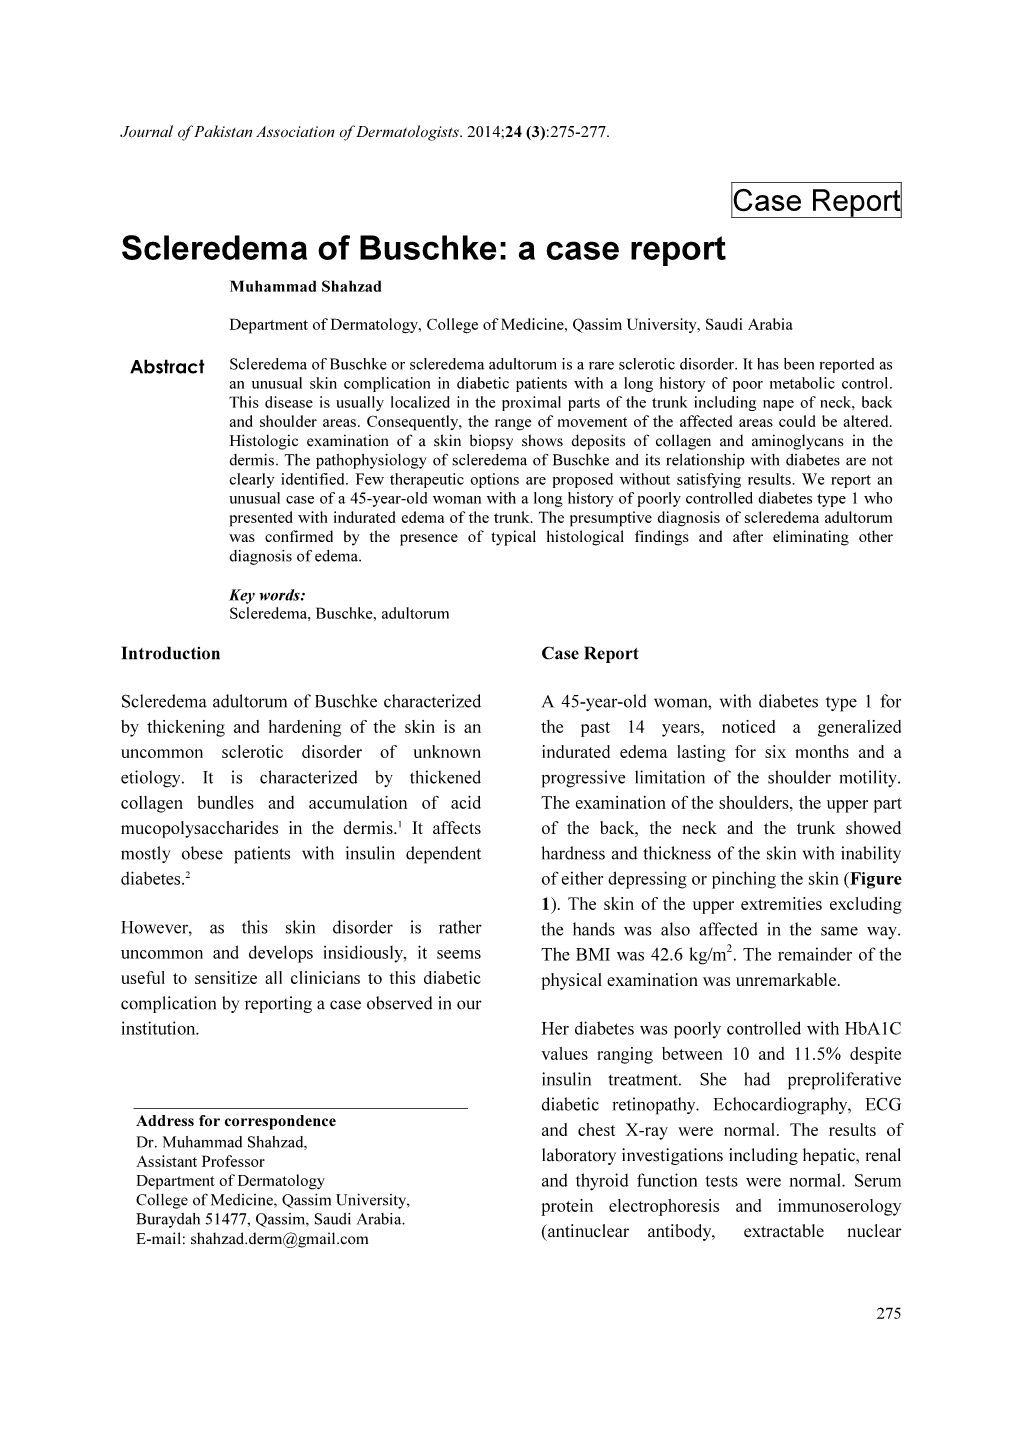 Scleredema of Buschke: a Case Report Muhammad Shahzad